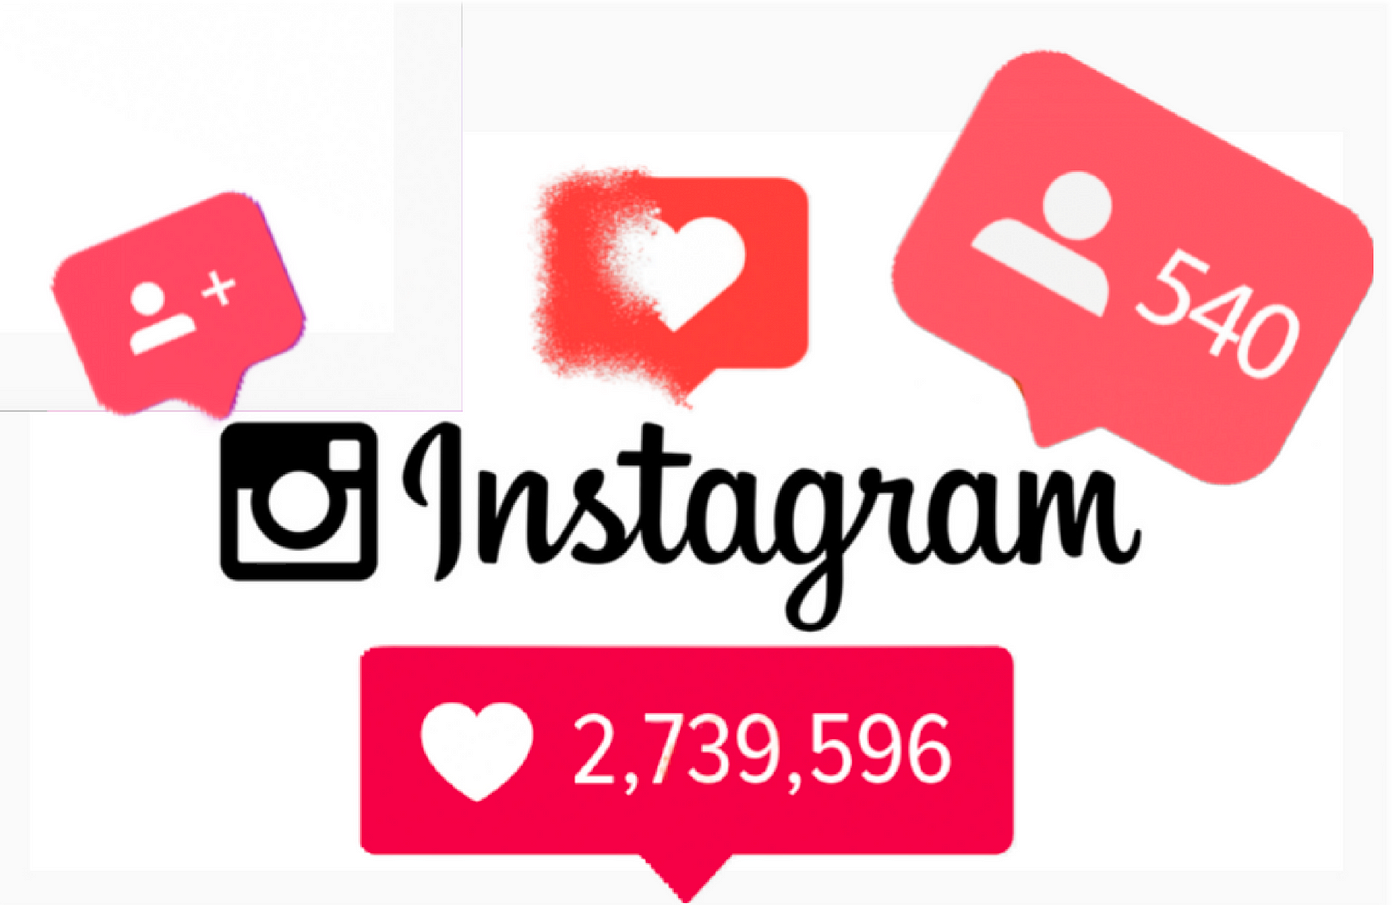 How To Get 9000 REAL Instagram Followers (Fast & Free)